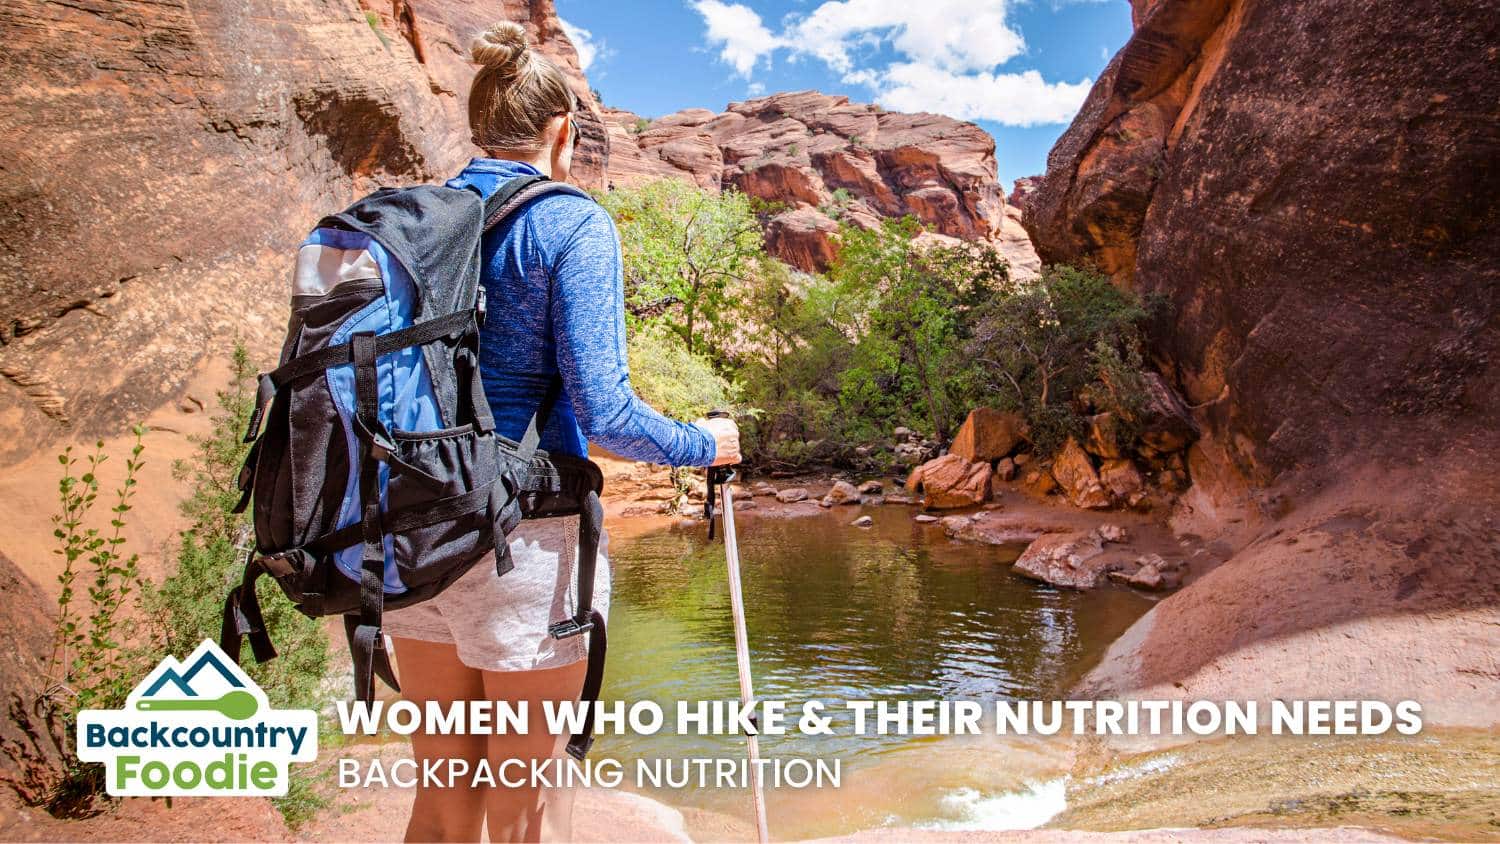 Backcountry Foodie Blog Women Who Hike and Their Nutrition Needs Backpacking Nutrition thumbnail